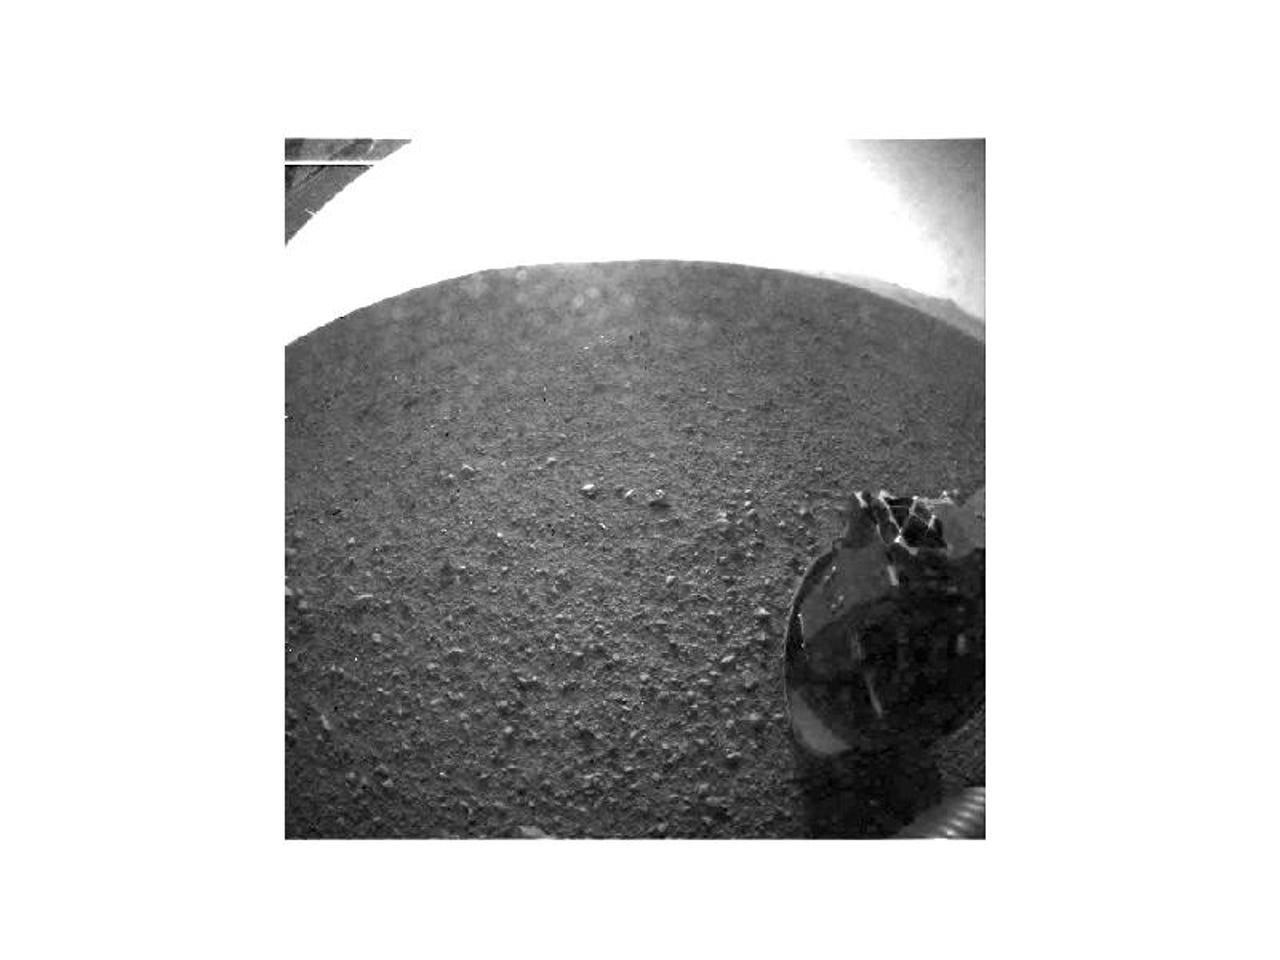 001_First_Image_from_Mars_01.jpg